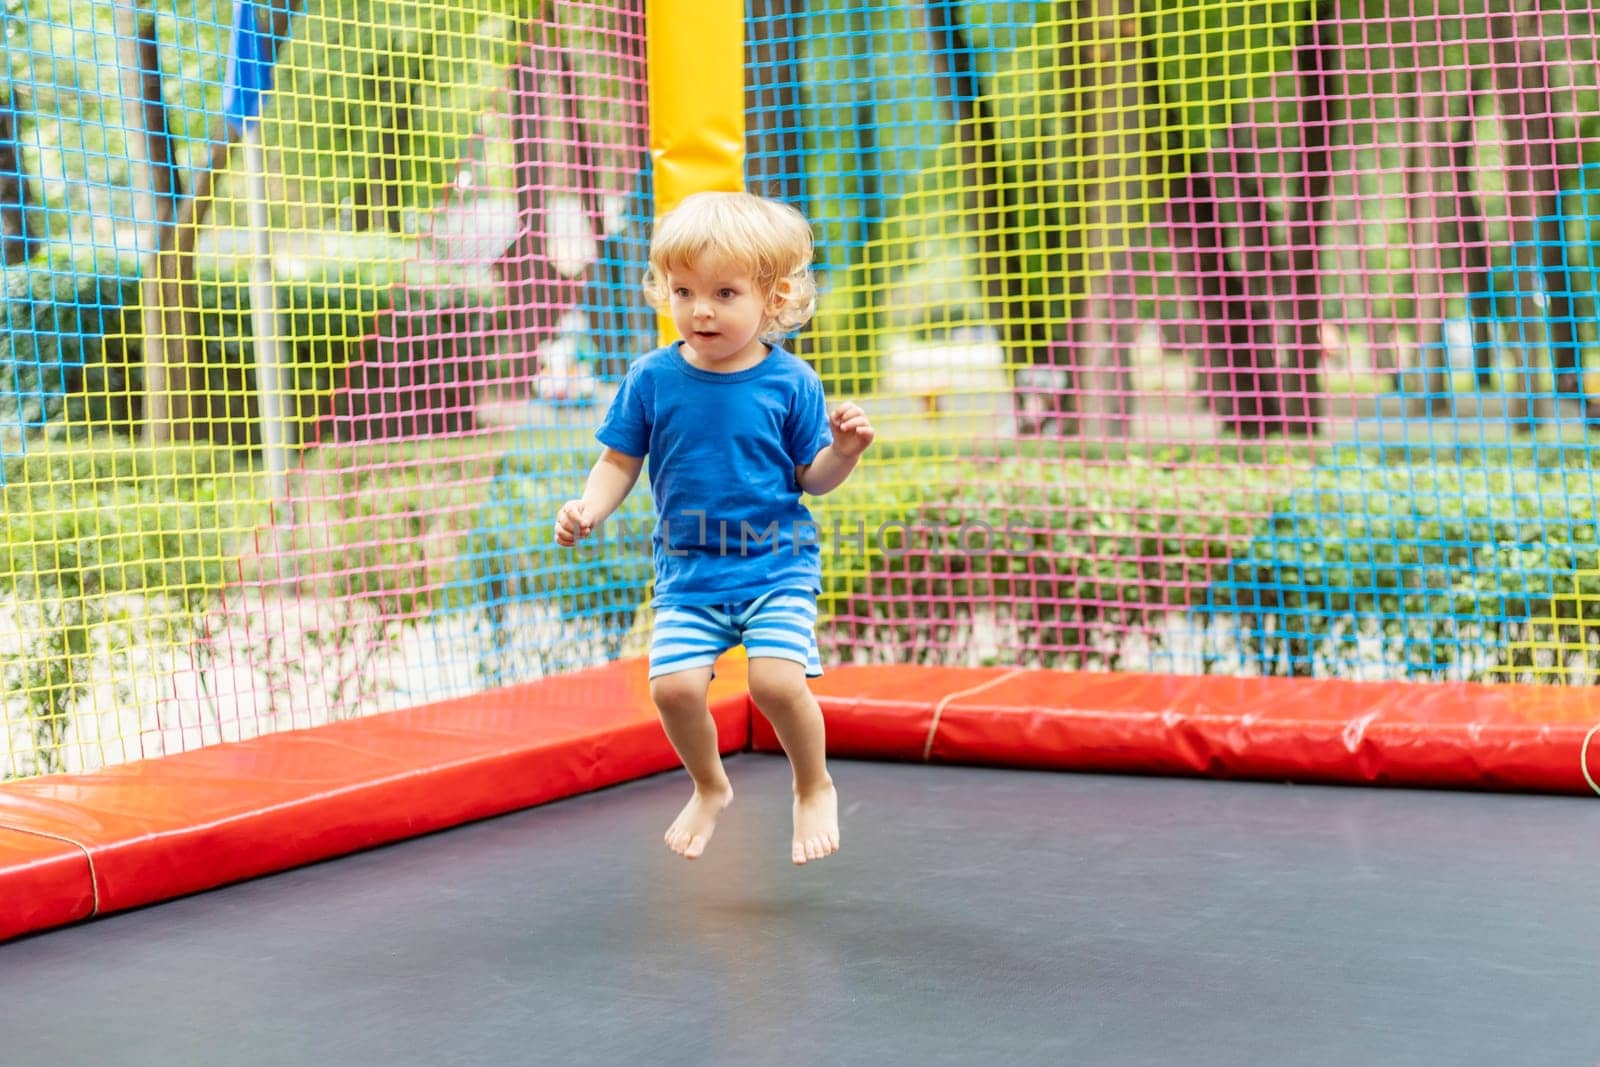 Toddler Jumping on Outdoor Trampoline by andreyz